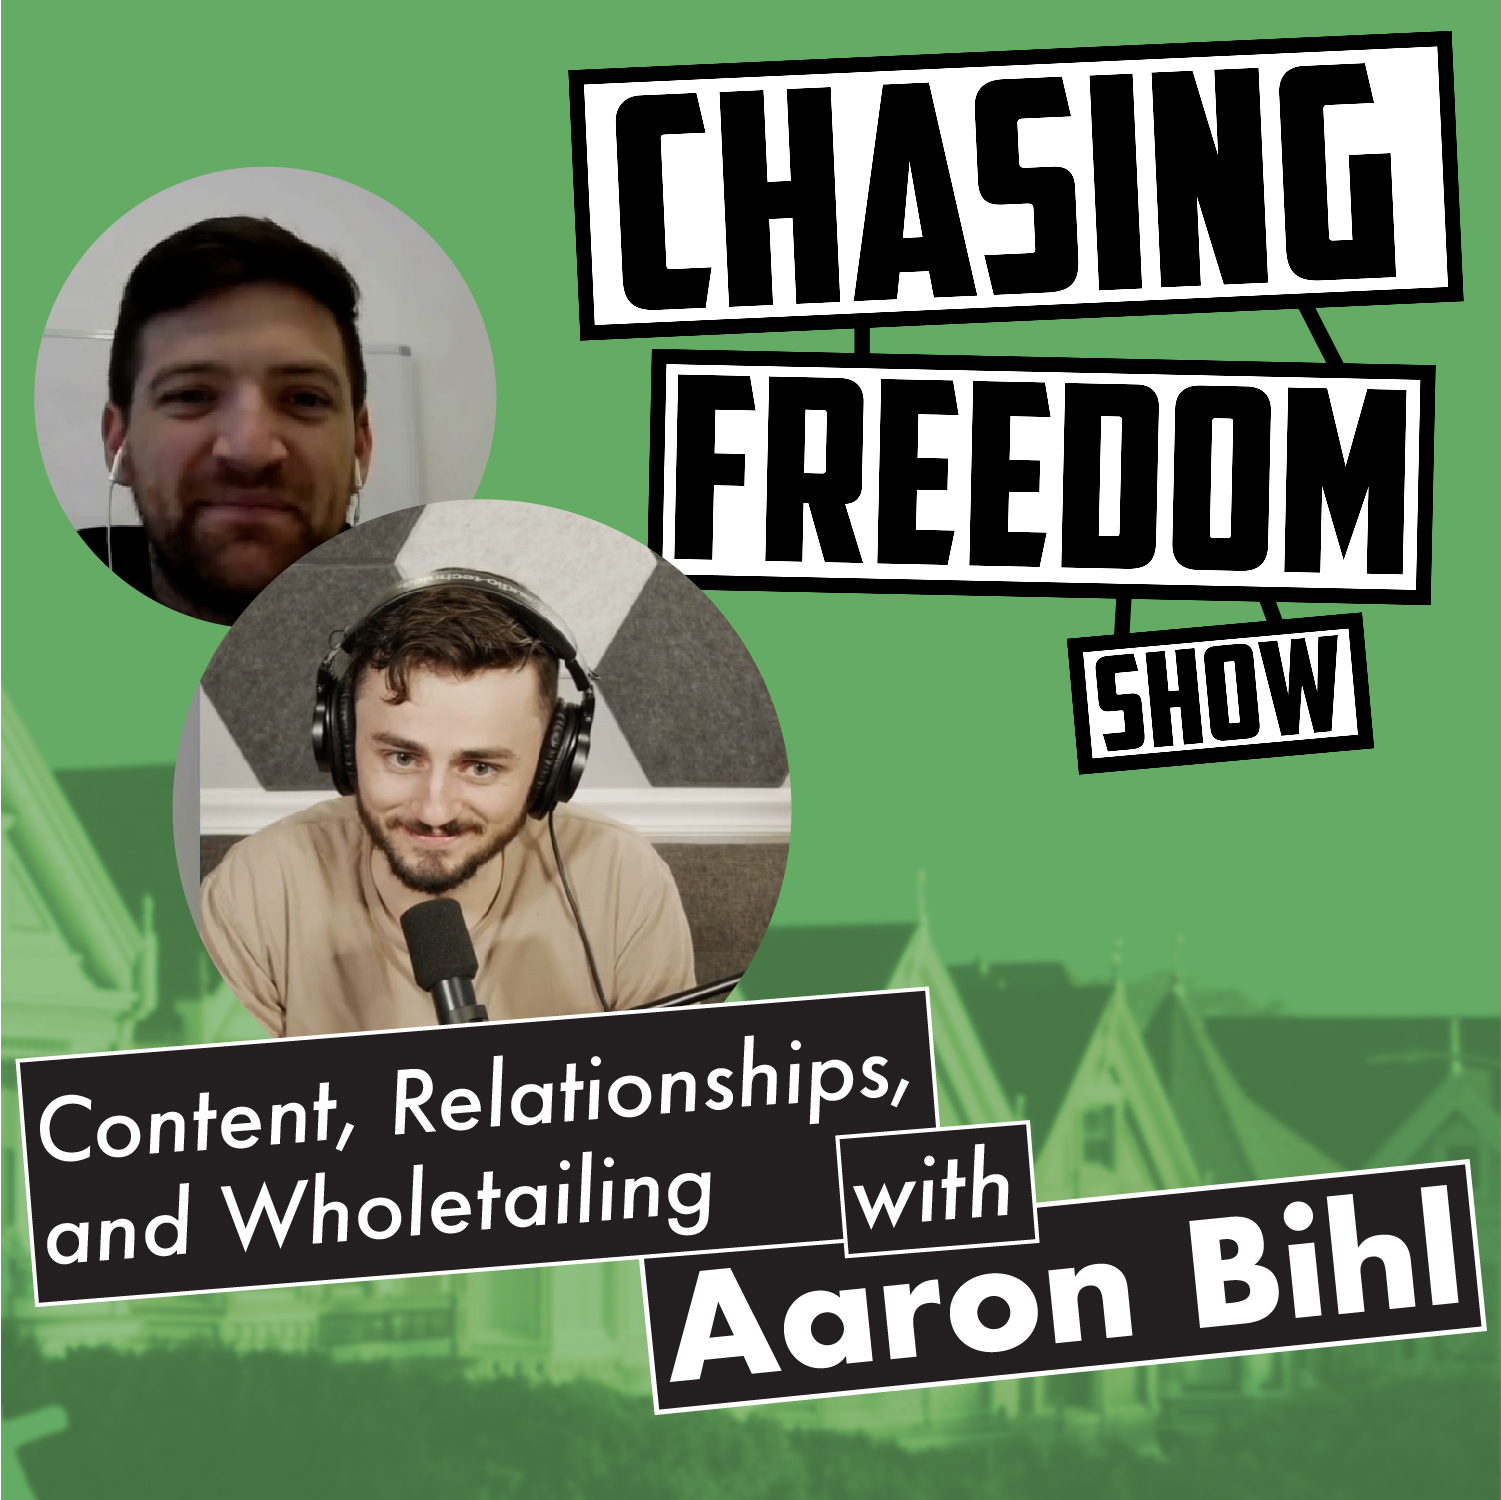 Episode 37: Content, Relationships, and Wholetailing with Aaron Bihl